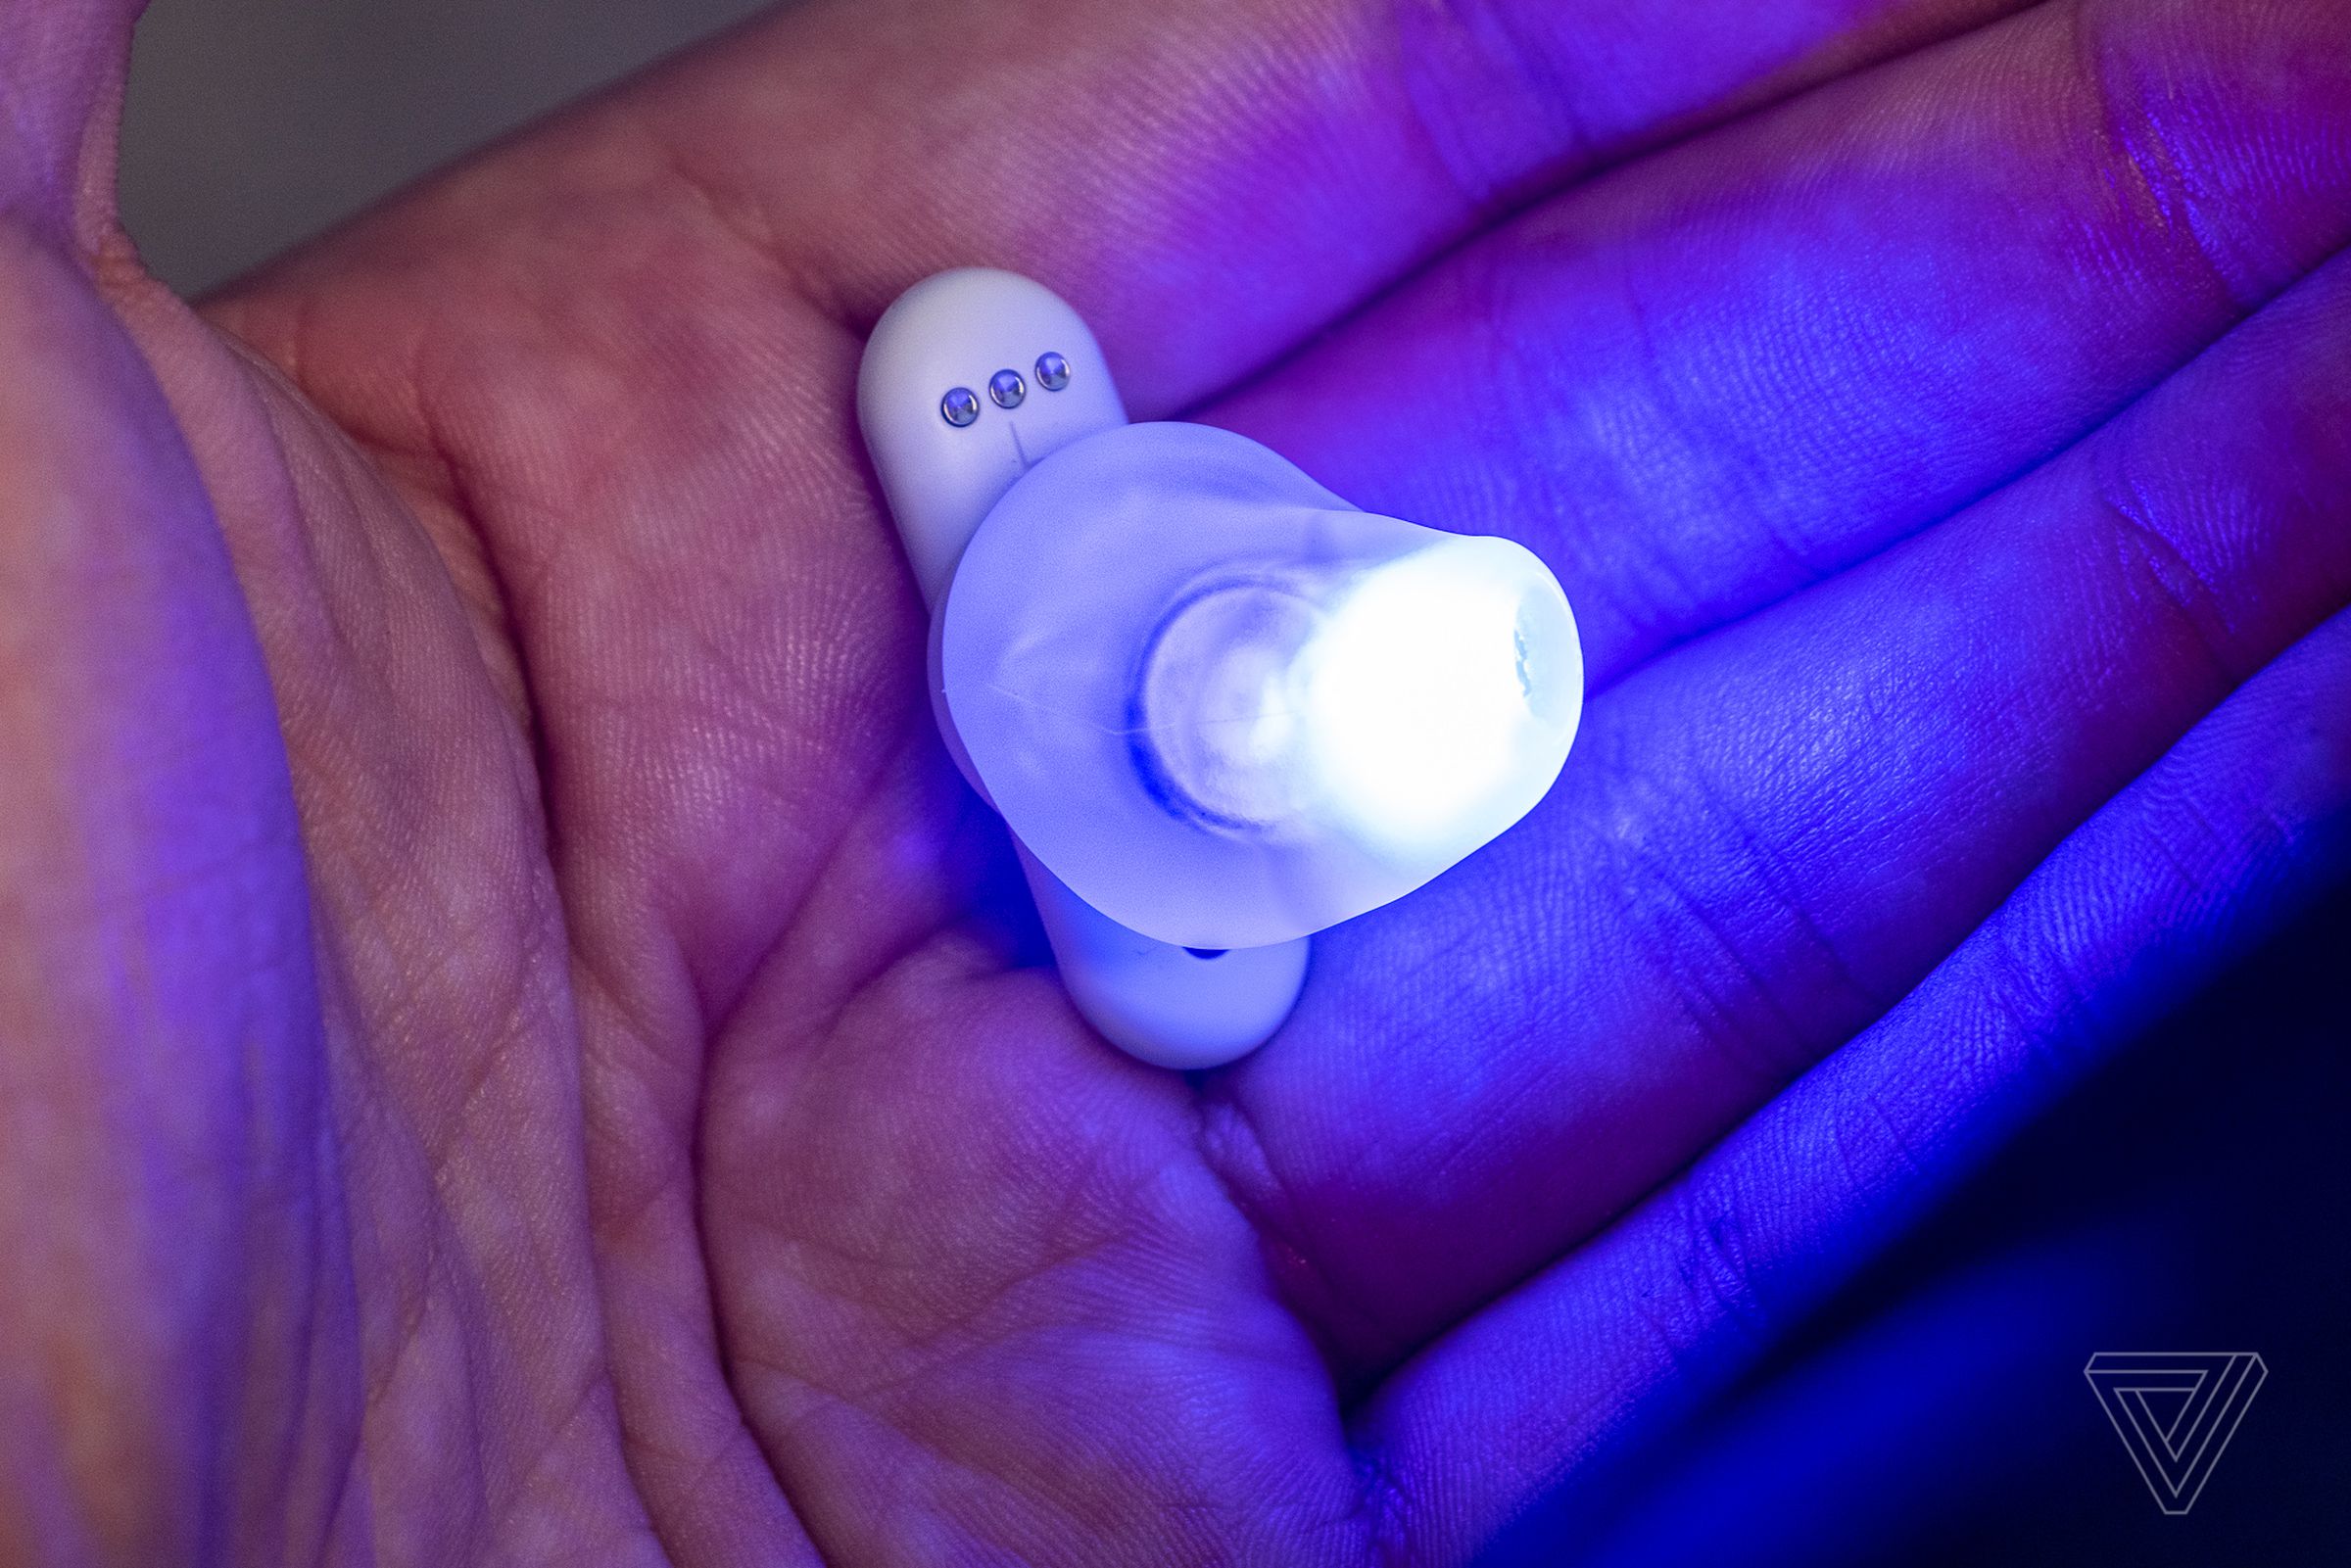 As the gel reacts to the LEDs, the ear tips warm up.